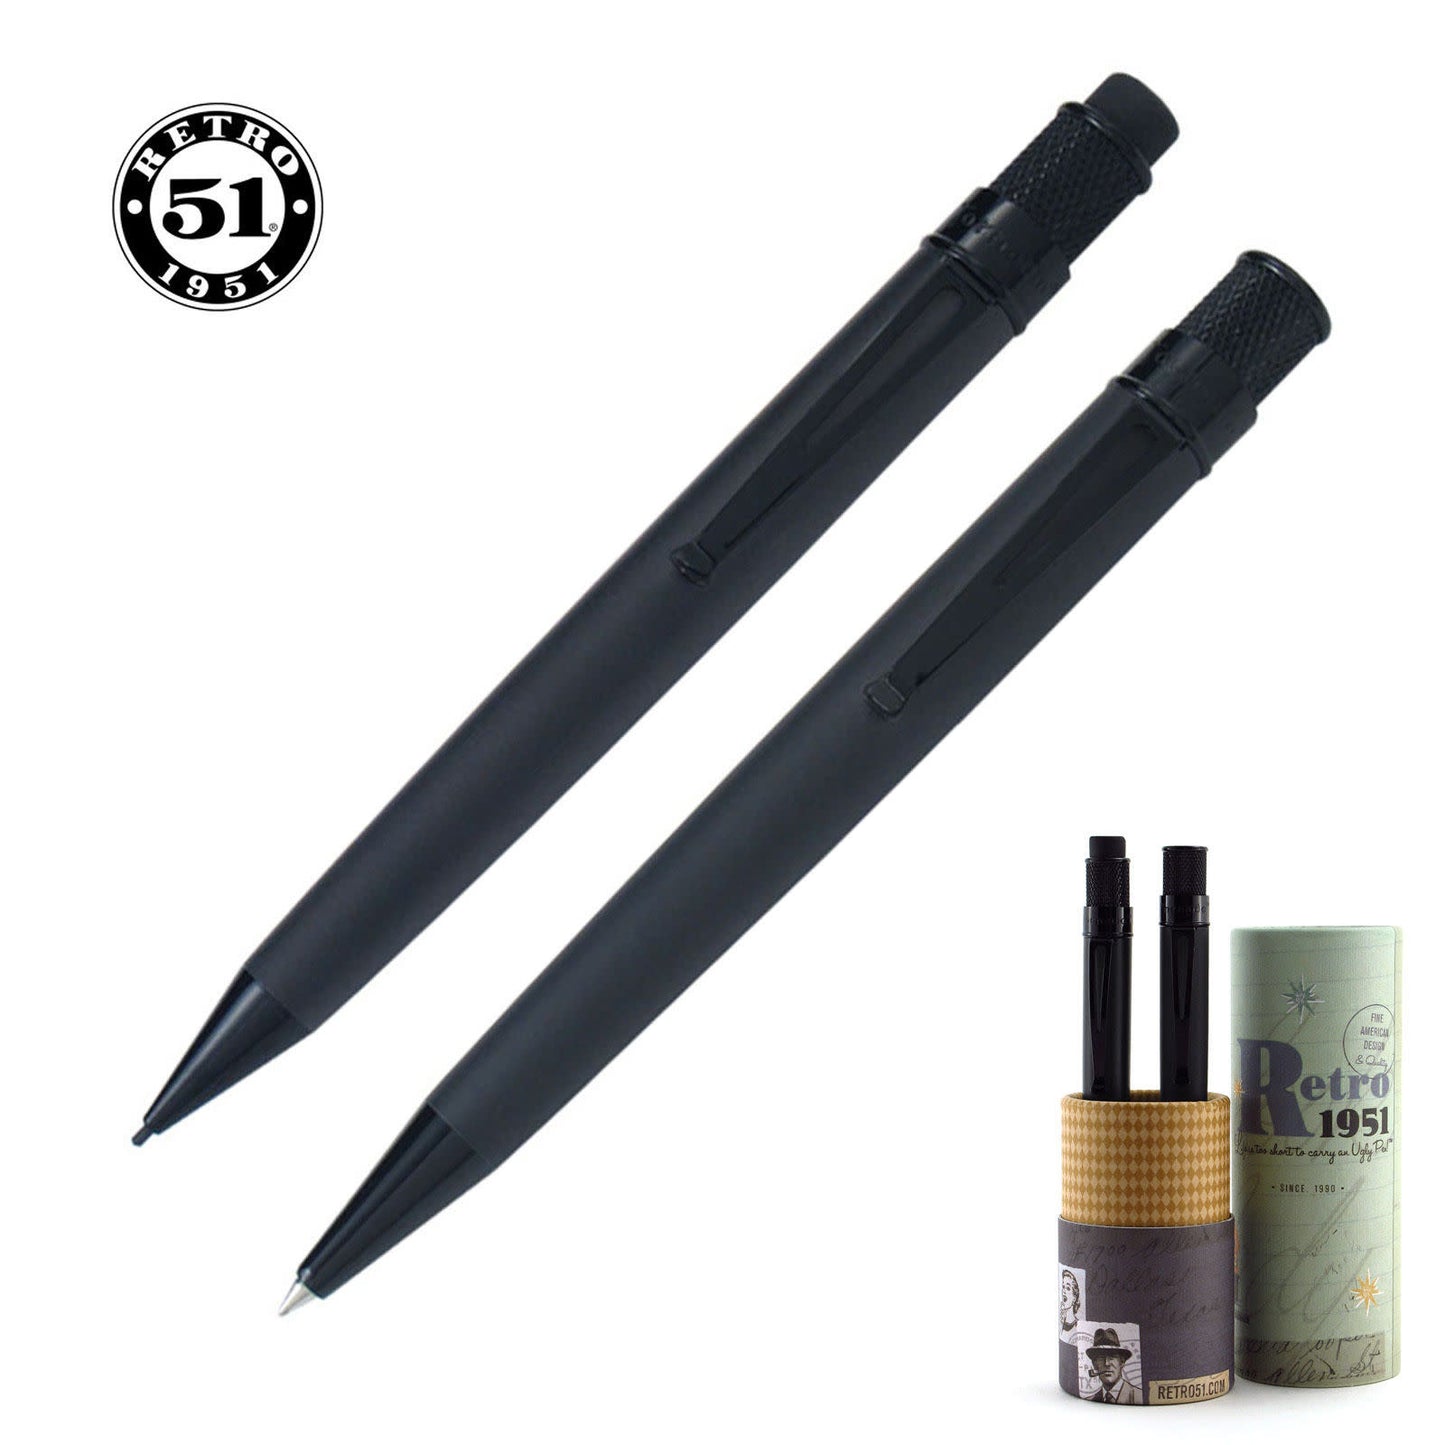 Retro 51 Tornado Gift Set - Stealth (Rollerball and Pencil 1.15mm)